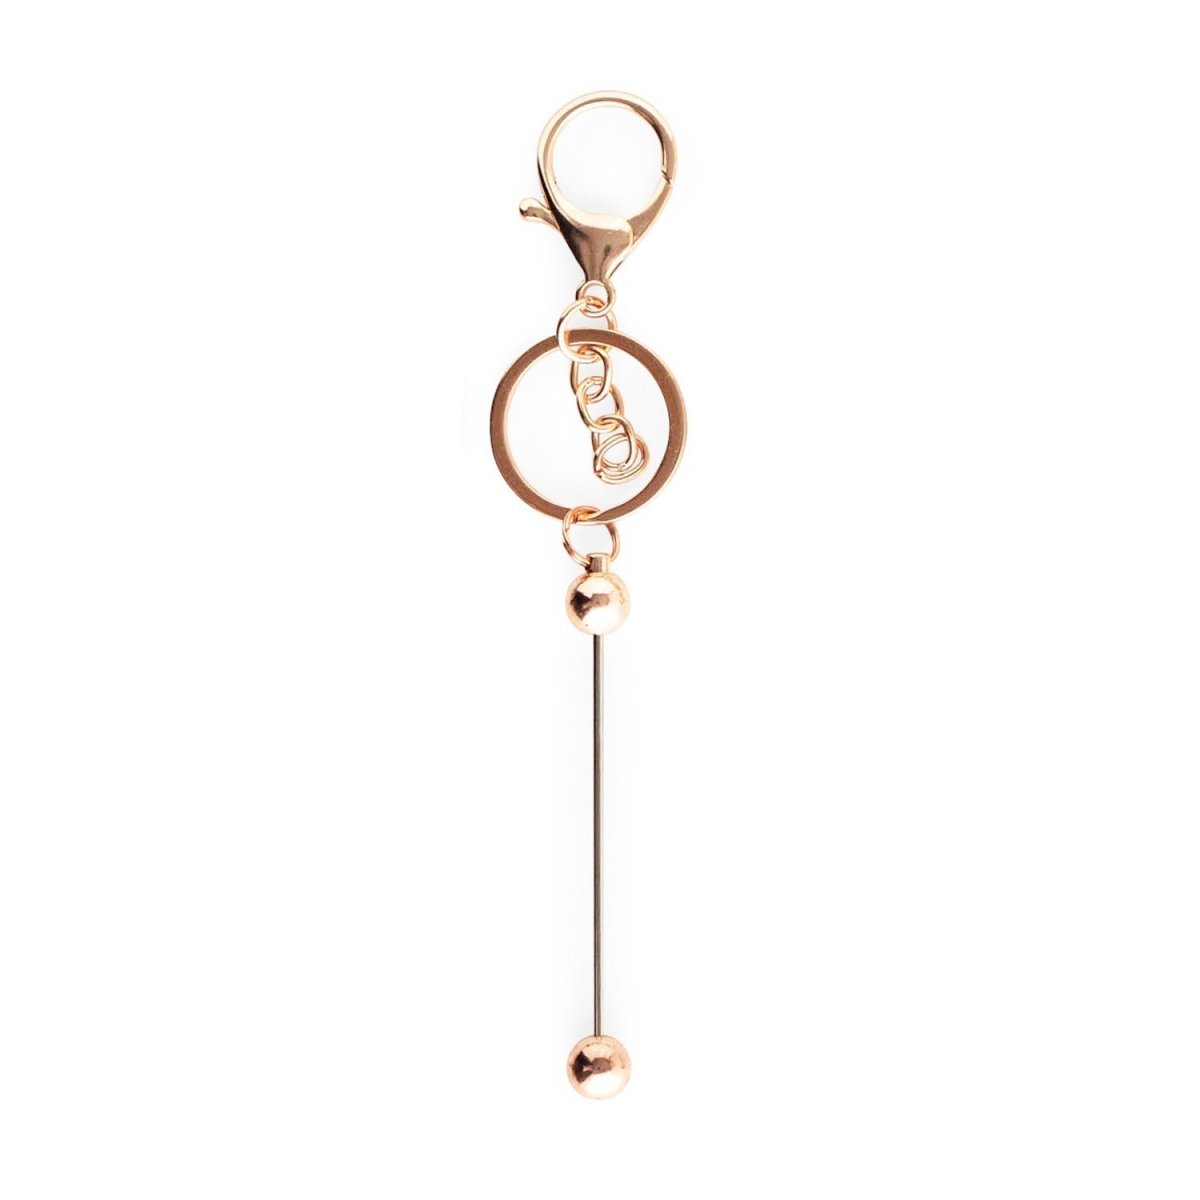 Beadables Premium Beadable Bar Keychains Soft Rose Gold from Cara & Co Craft Supply